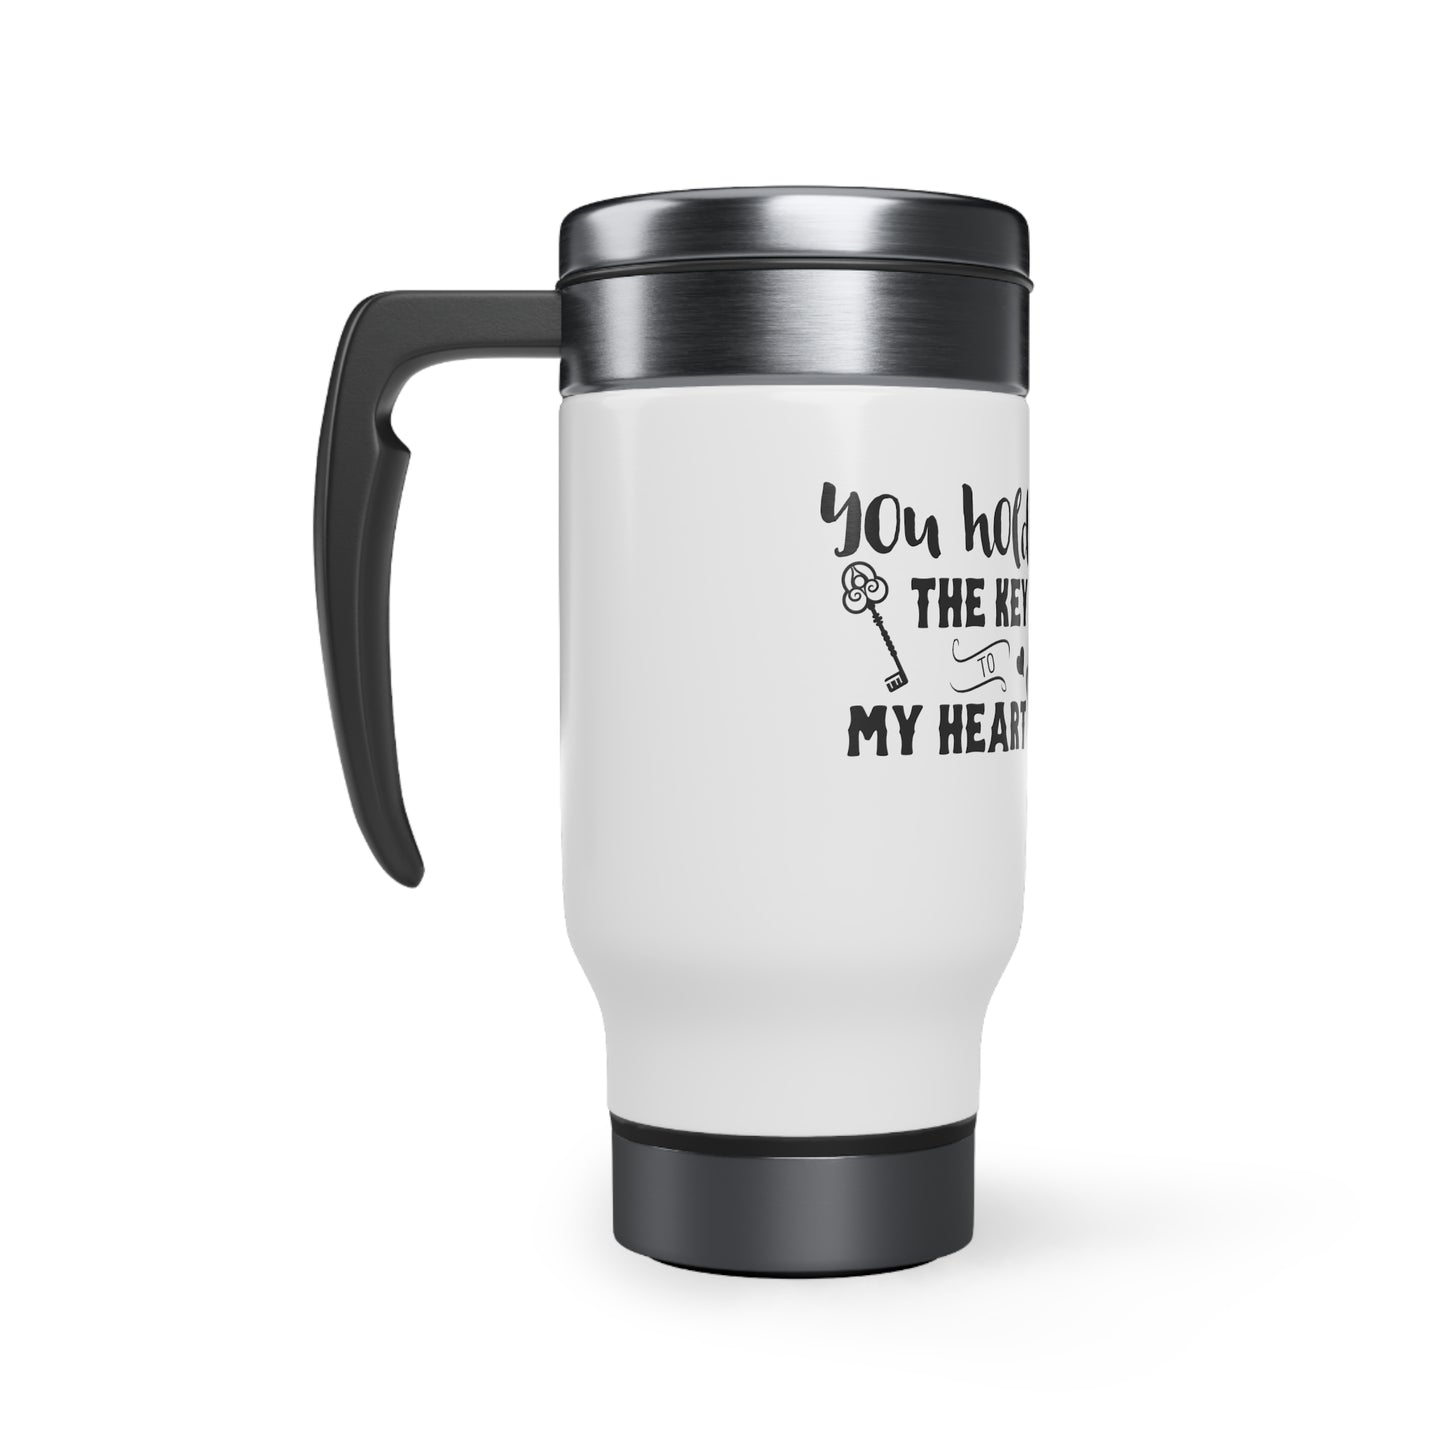 You hold the key of my heart Stainless Steel Travel Mug with Handle, 14oz